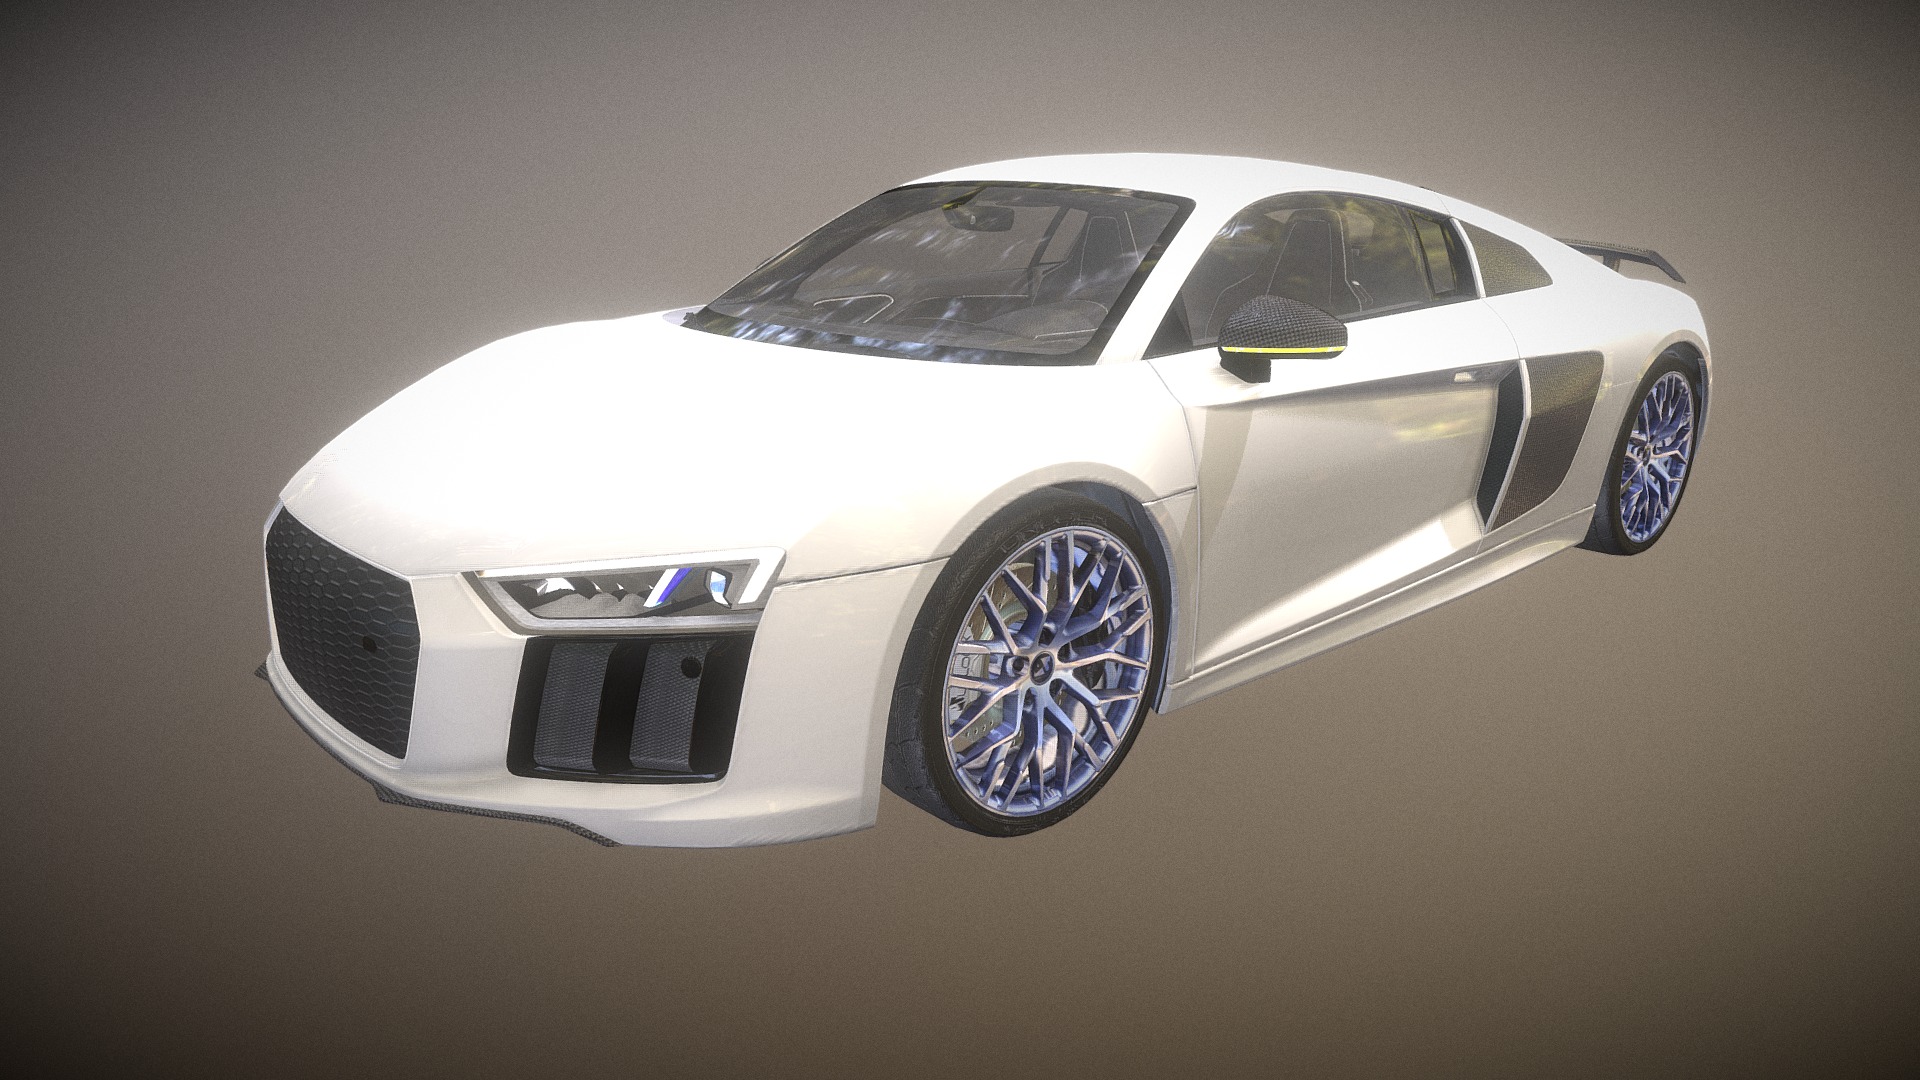 3D model Unlock Super Sports Car 05 - This is a 3D model of the Unlock Super Sports Car 05. The 3D model is about a white car with blue rims.